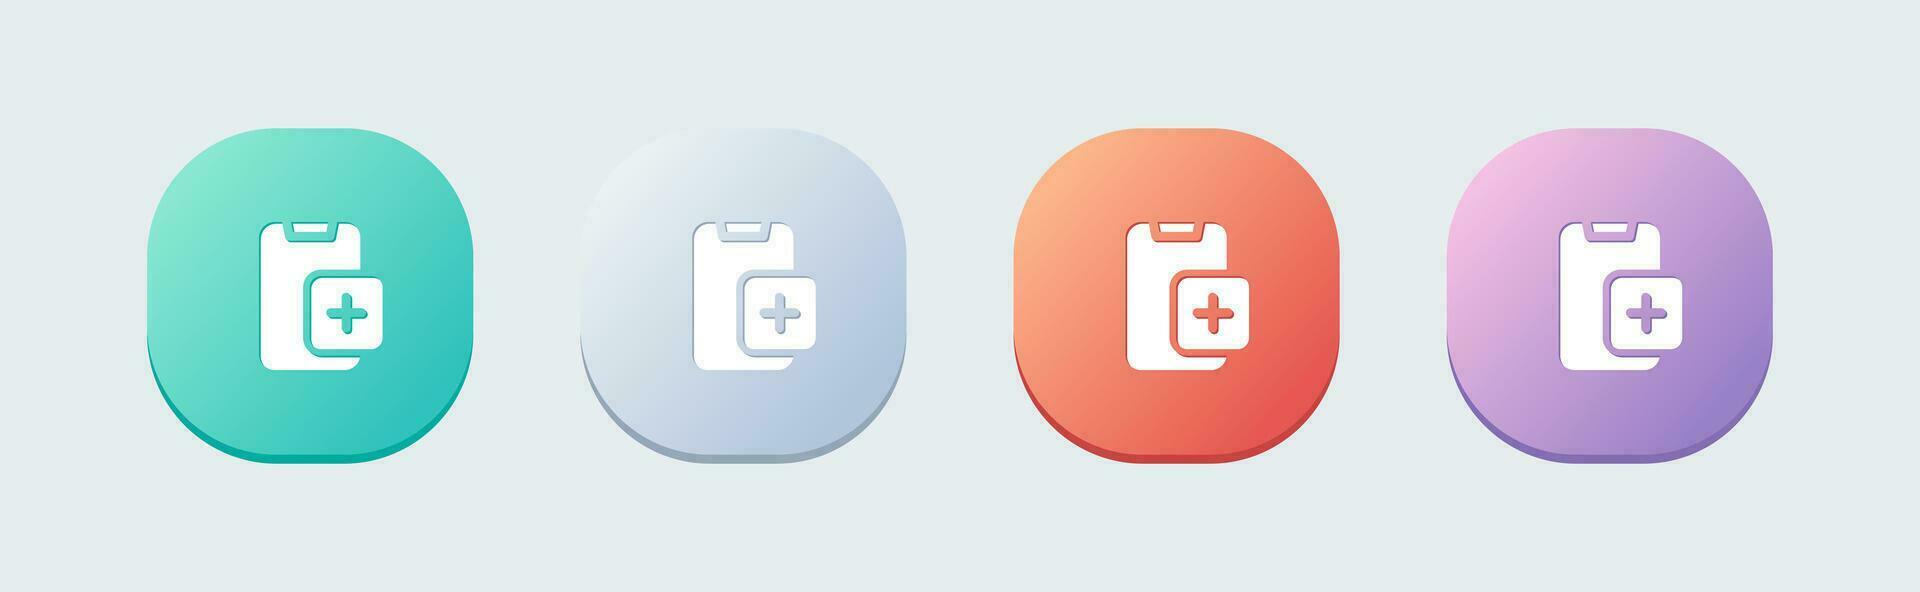 Add device solid icon in flat design style. Phone signs vector illustration.